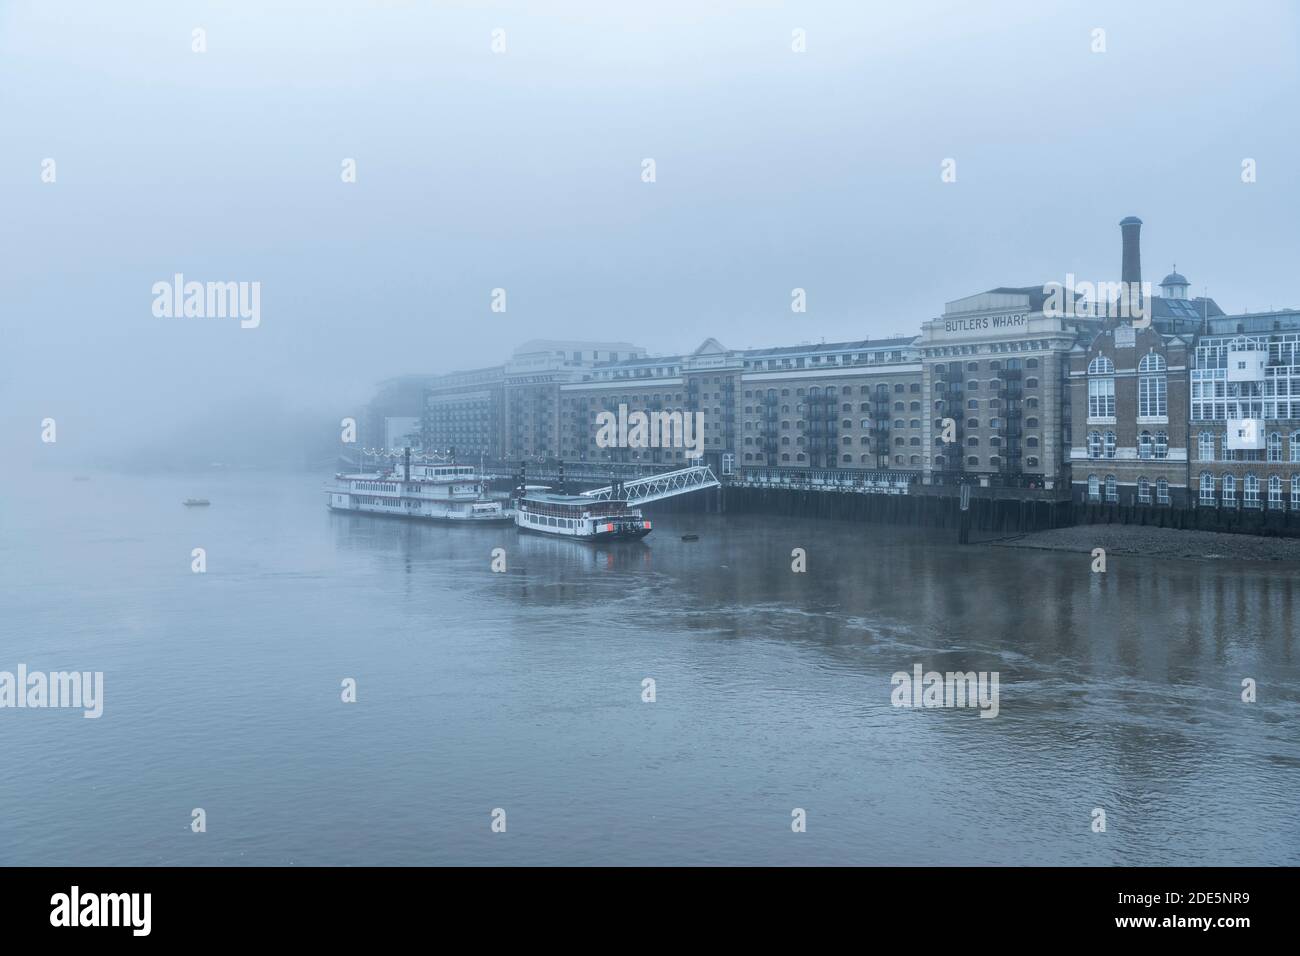 Butlers Wharf Pier and River Thames in thick fog and mist, on a cool winter morning in the city in foggy and misty moody weather during Covid-19 Coronavirus lockdown, England, UK Stock Photo